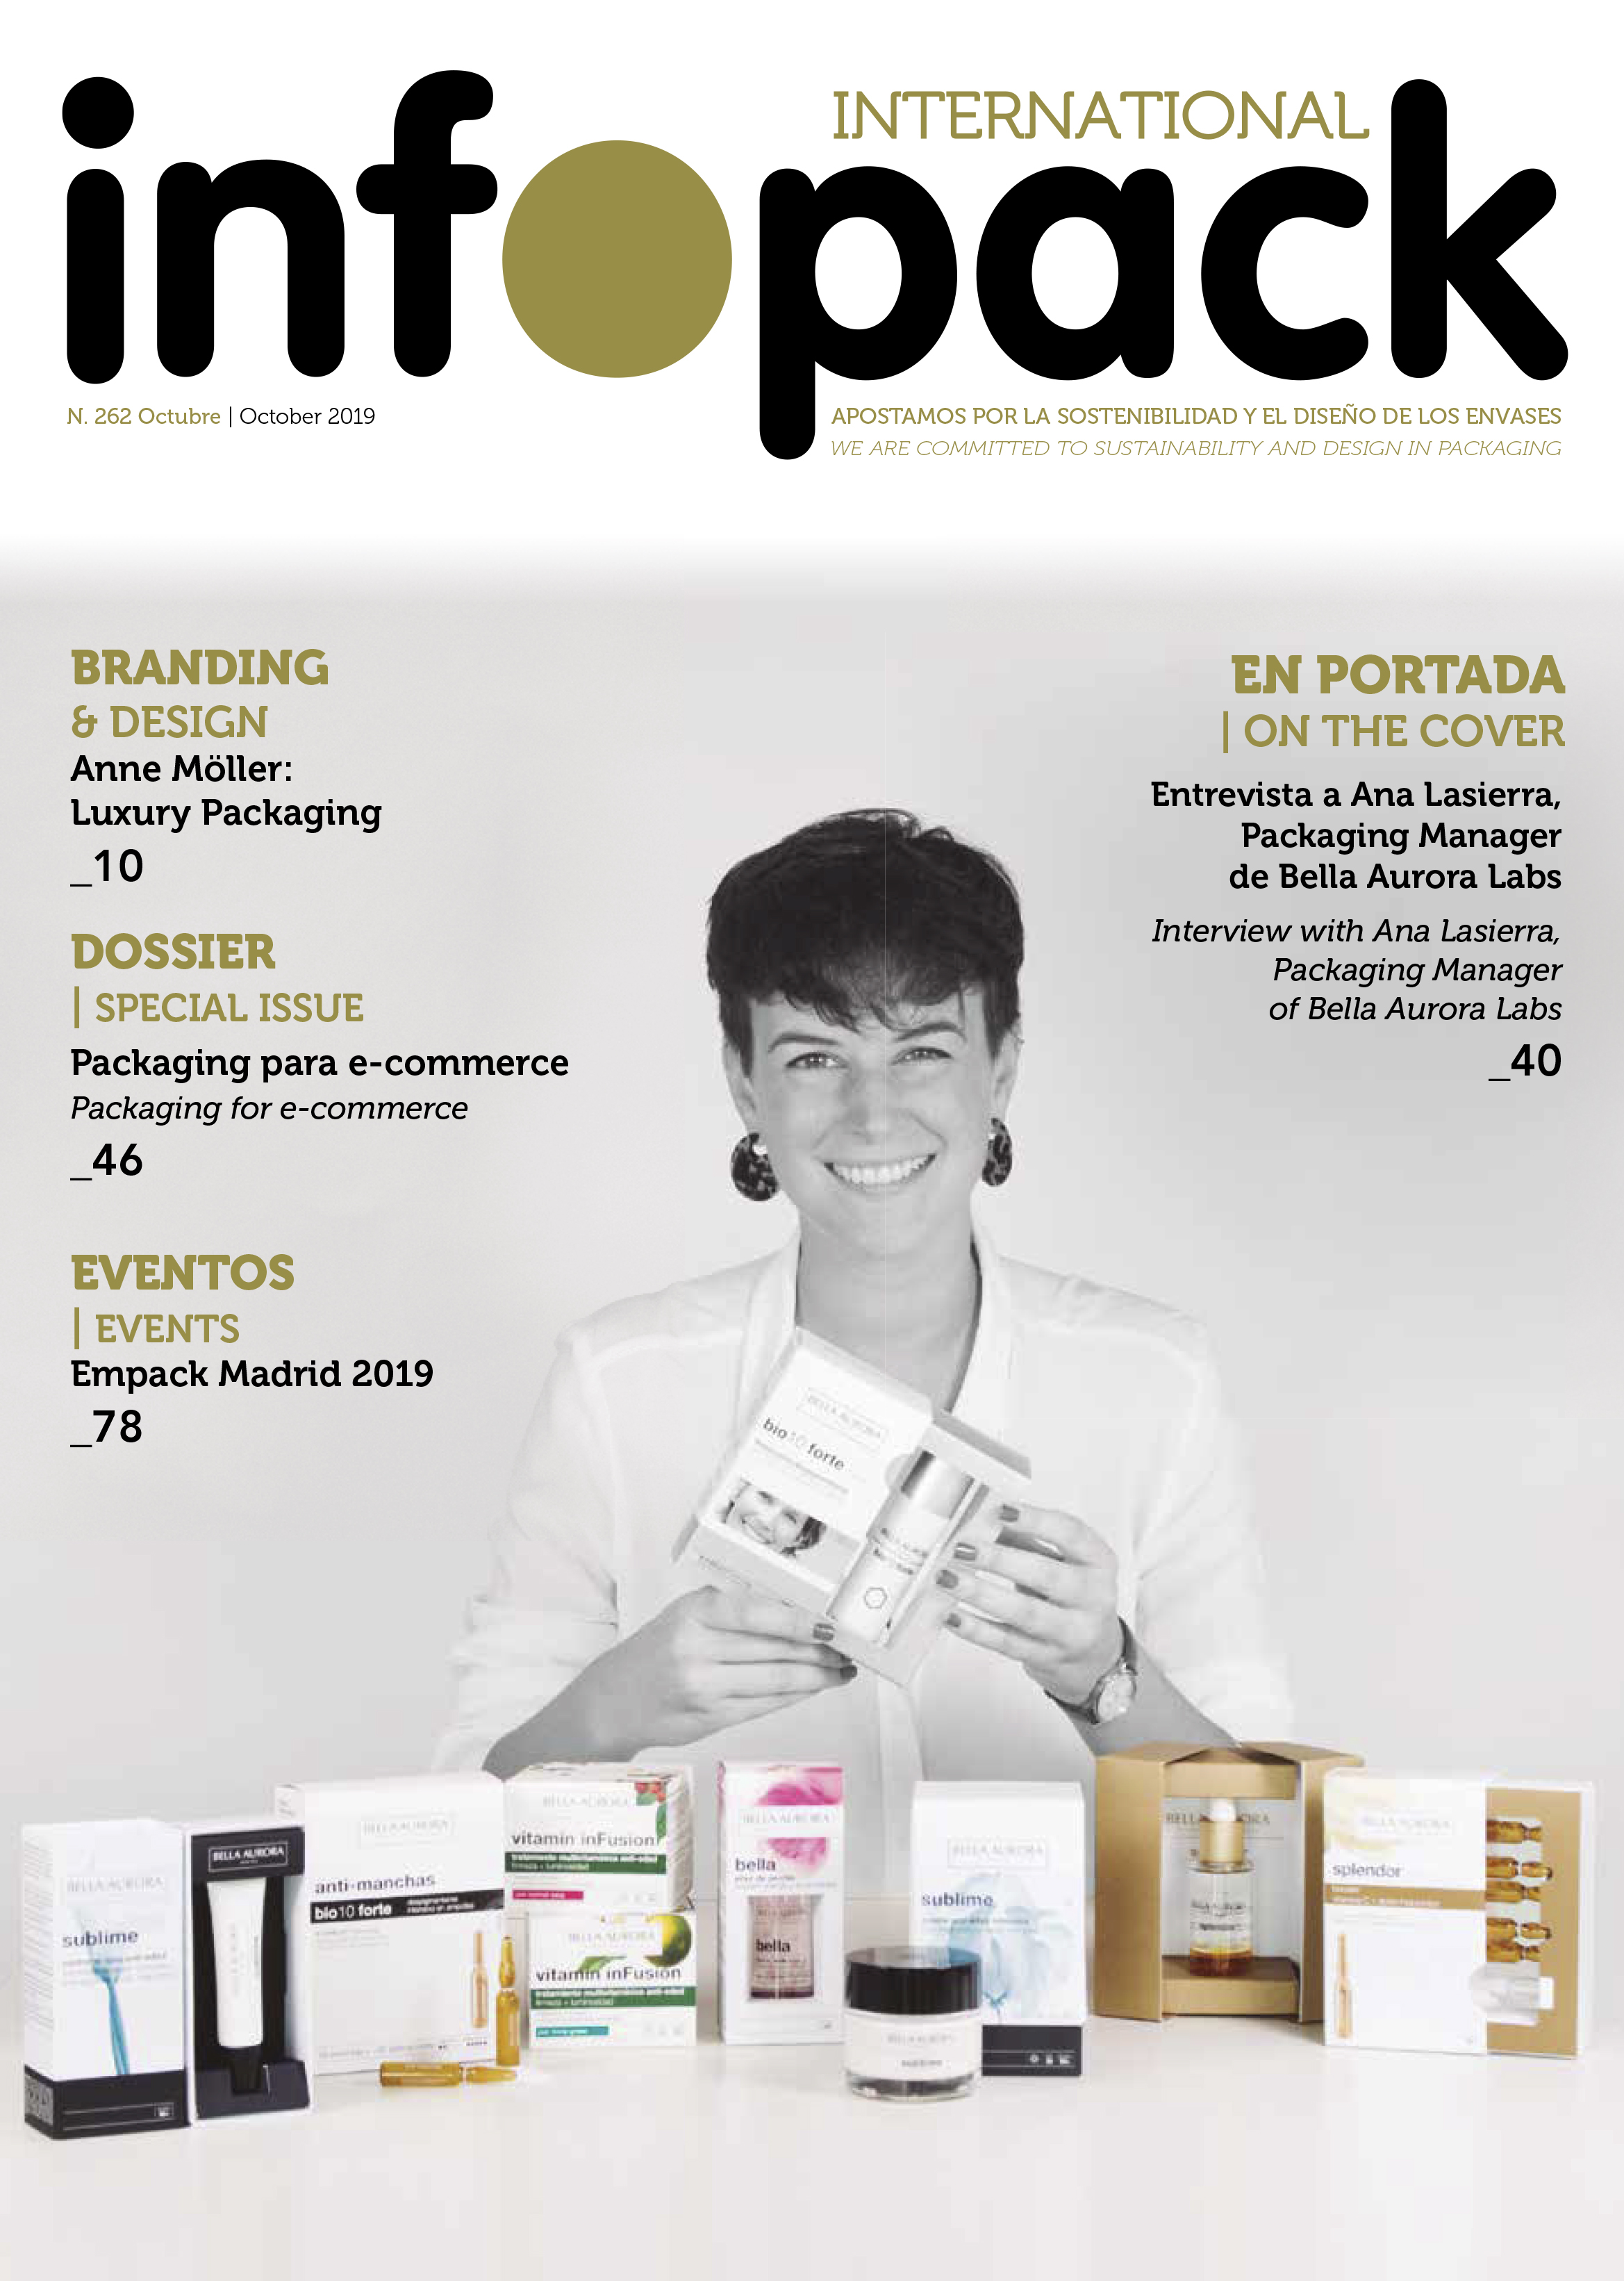 Ana Lasierra, on the cover of Infopack magazine